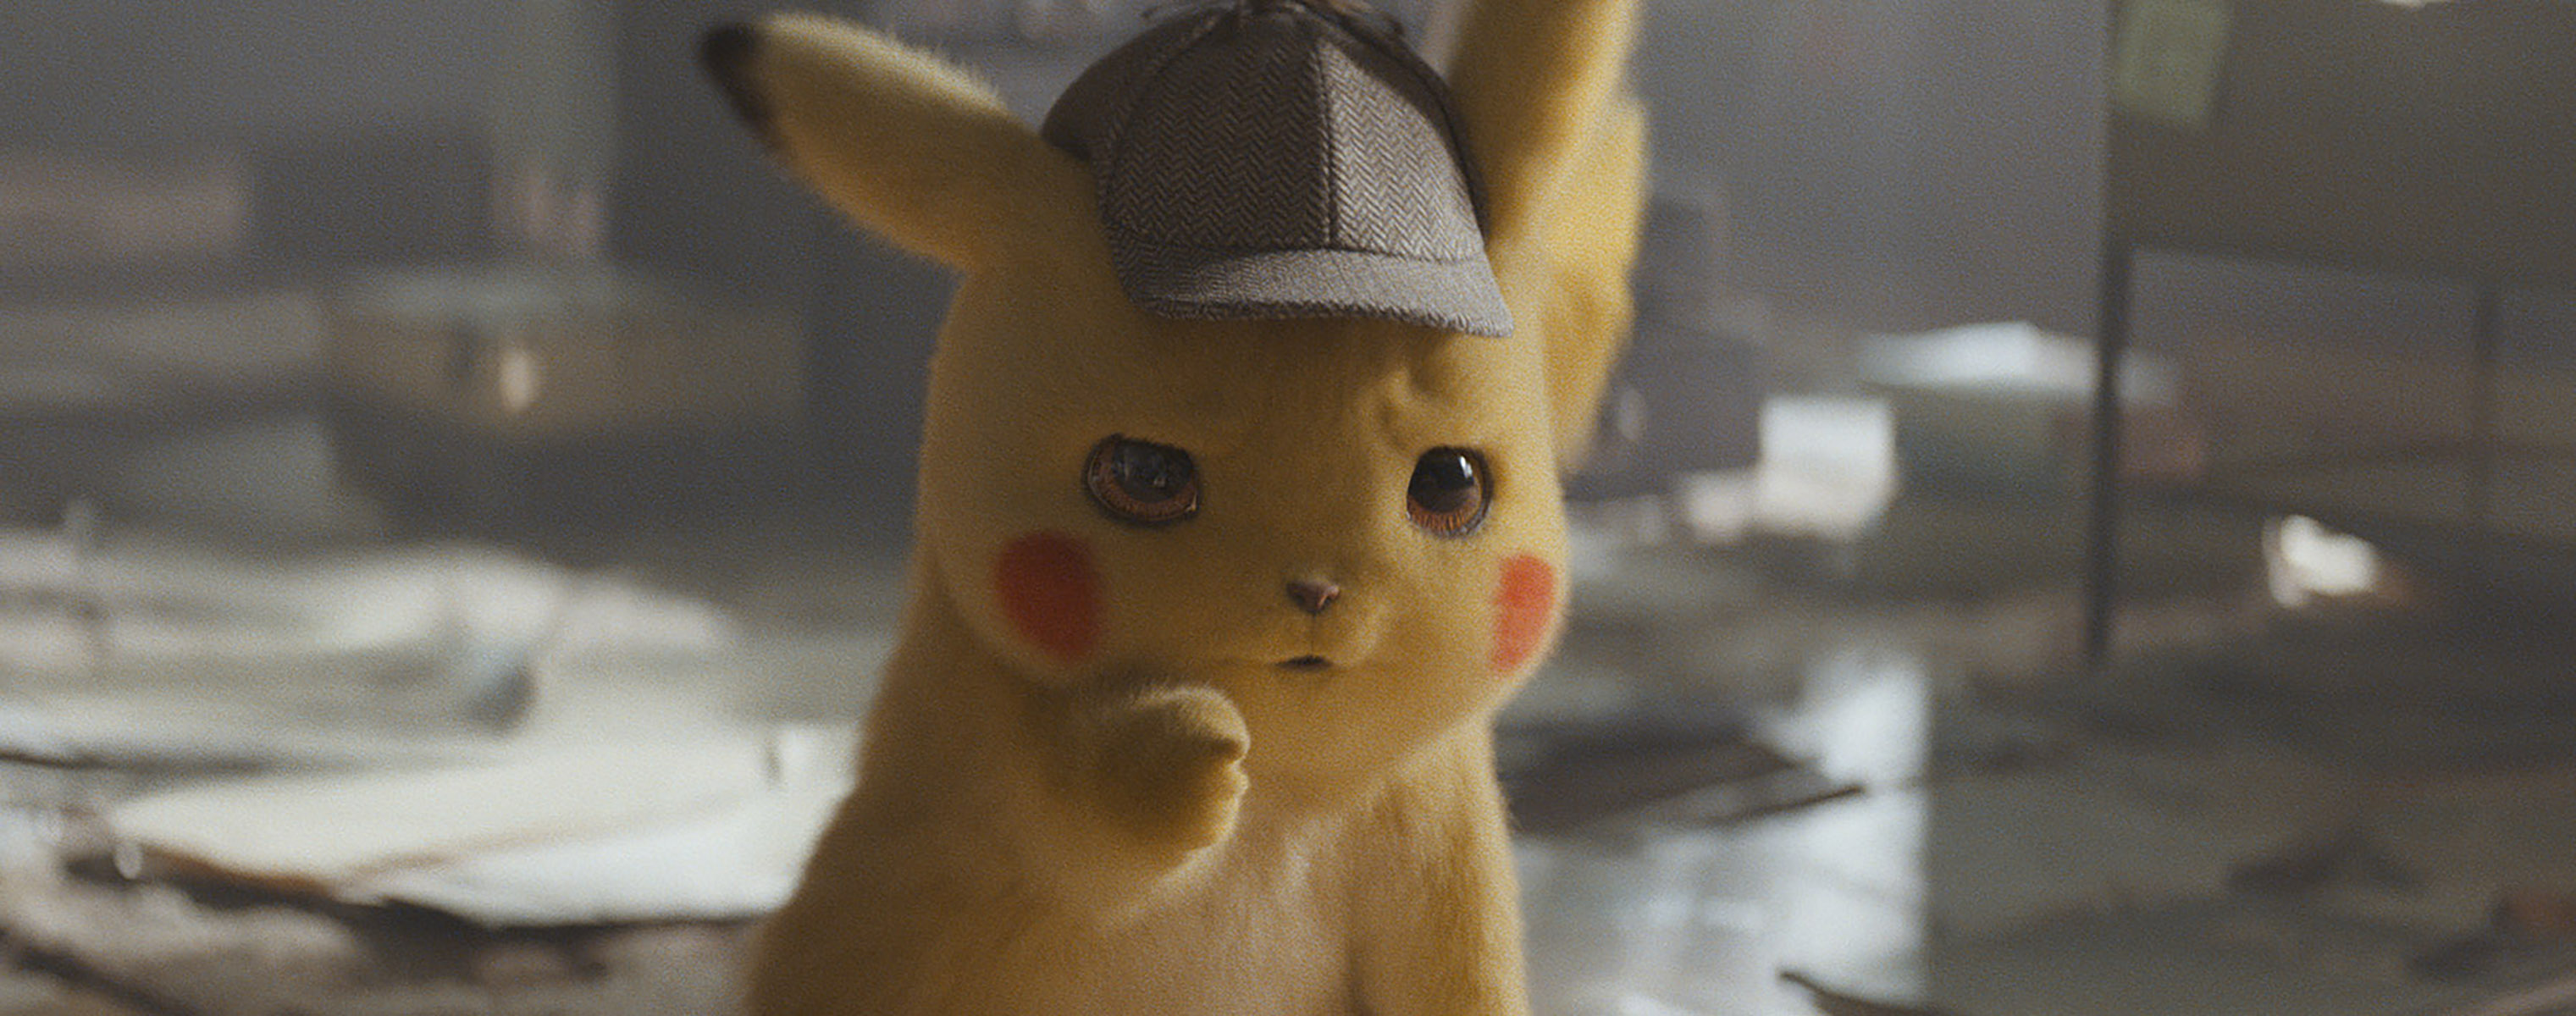 The title character in "Detective Pikachu" (voiced by Ryan Reynolds) (Courtesy of Warner Bros. Pictures)